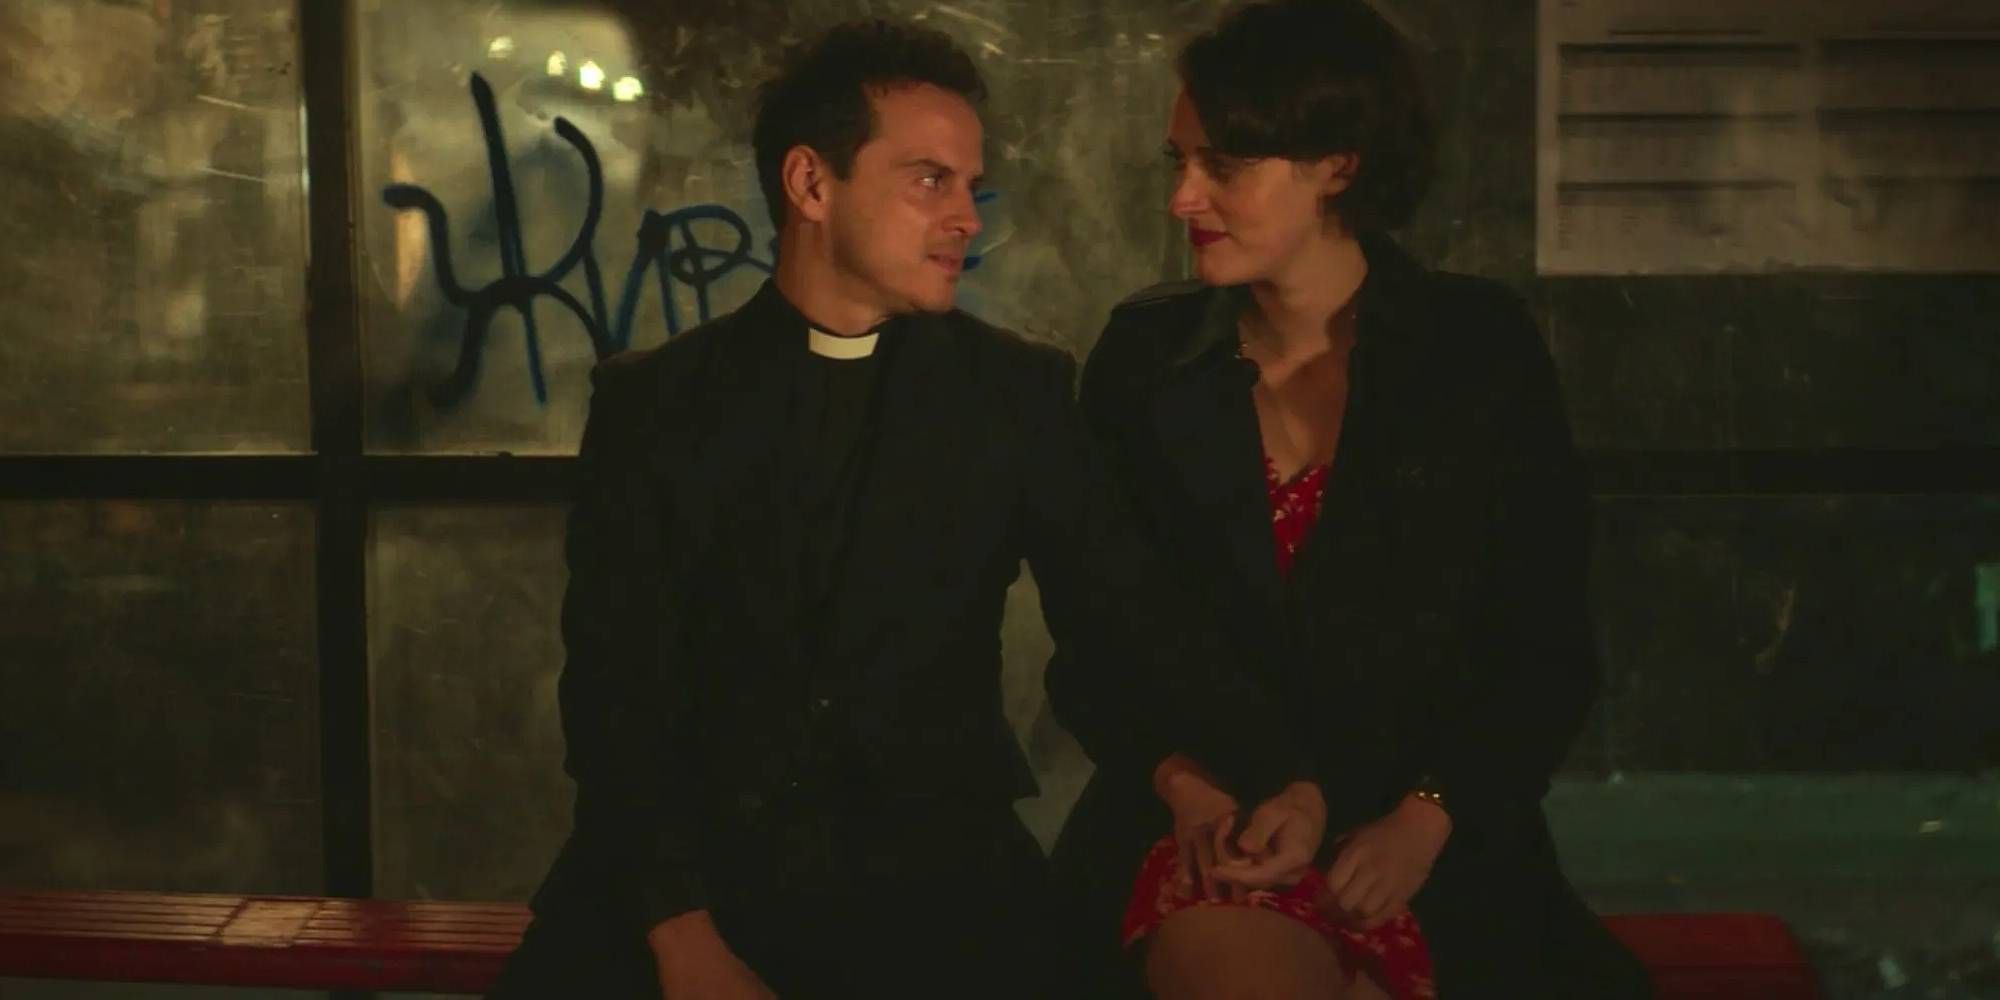 The Priest and Fleabag in Fleabag sitting next to each other on a bus stop and touching hands.